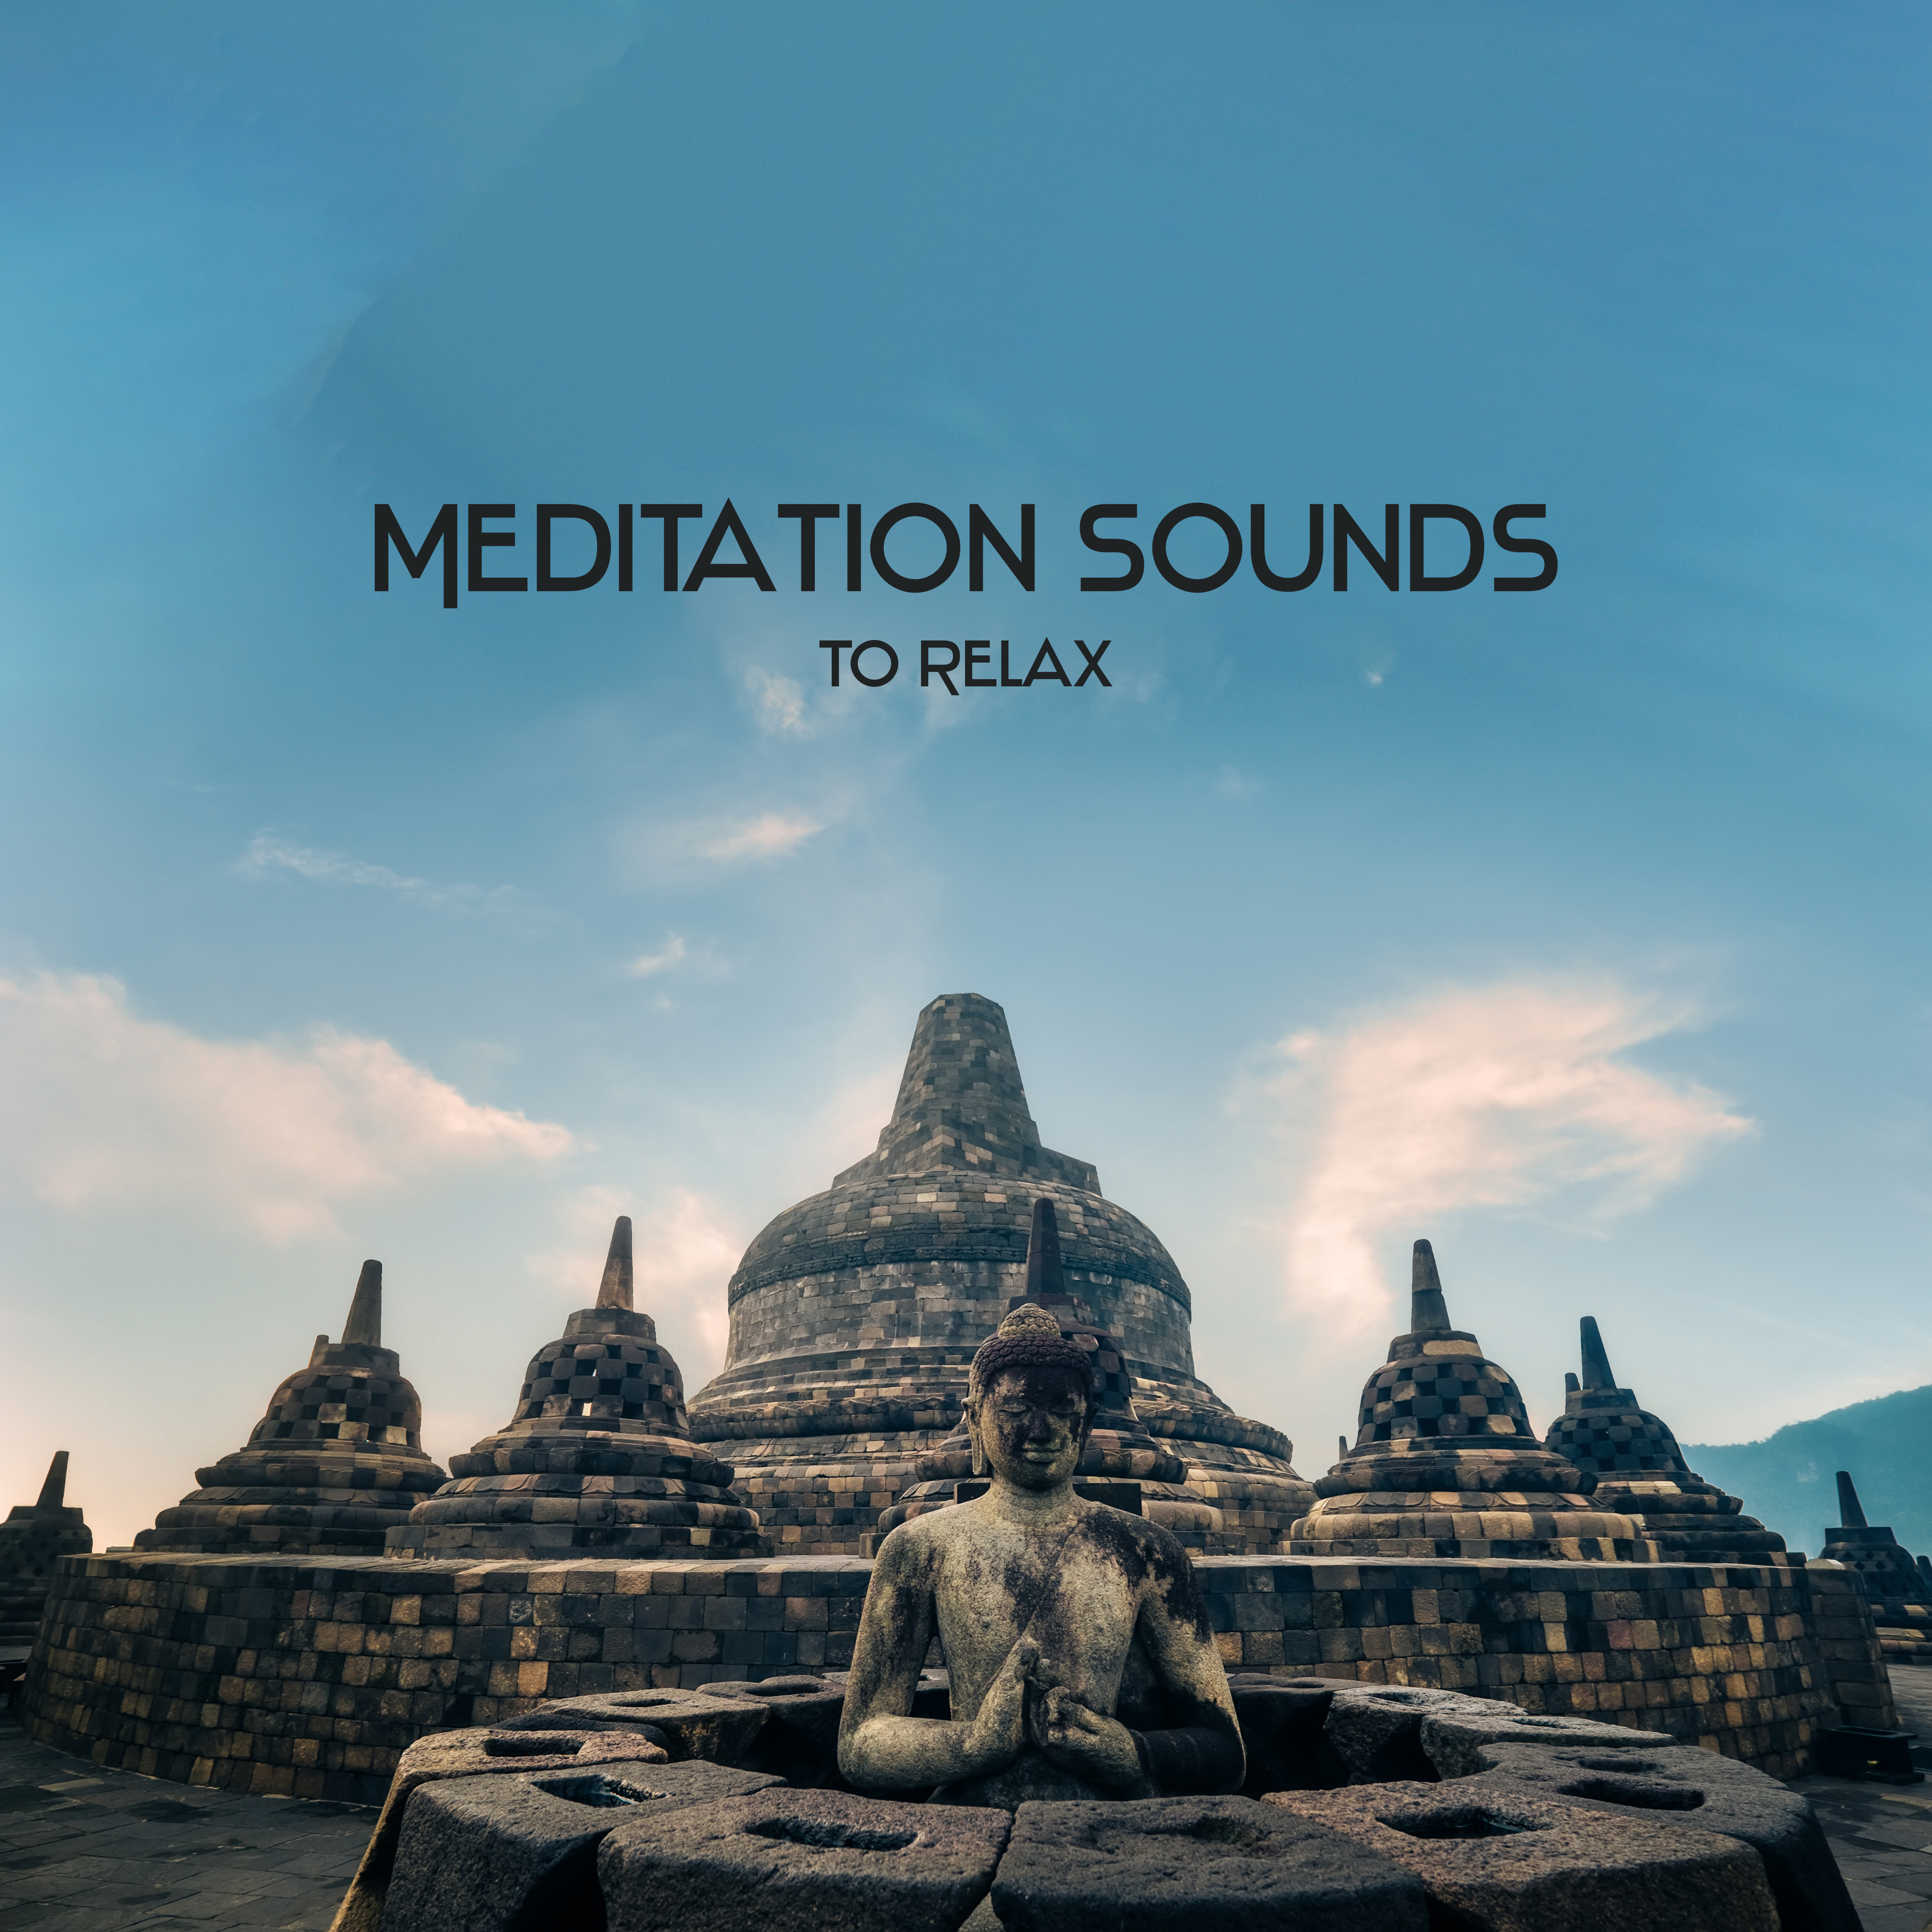 Meditation Sounds to Relax